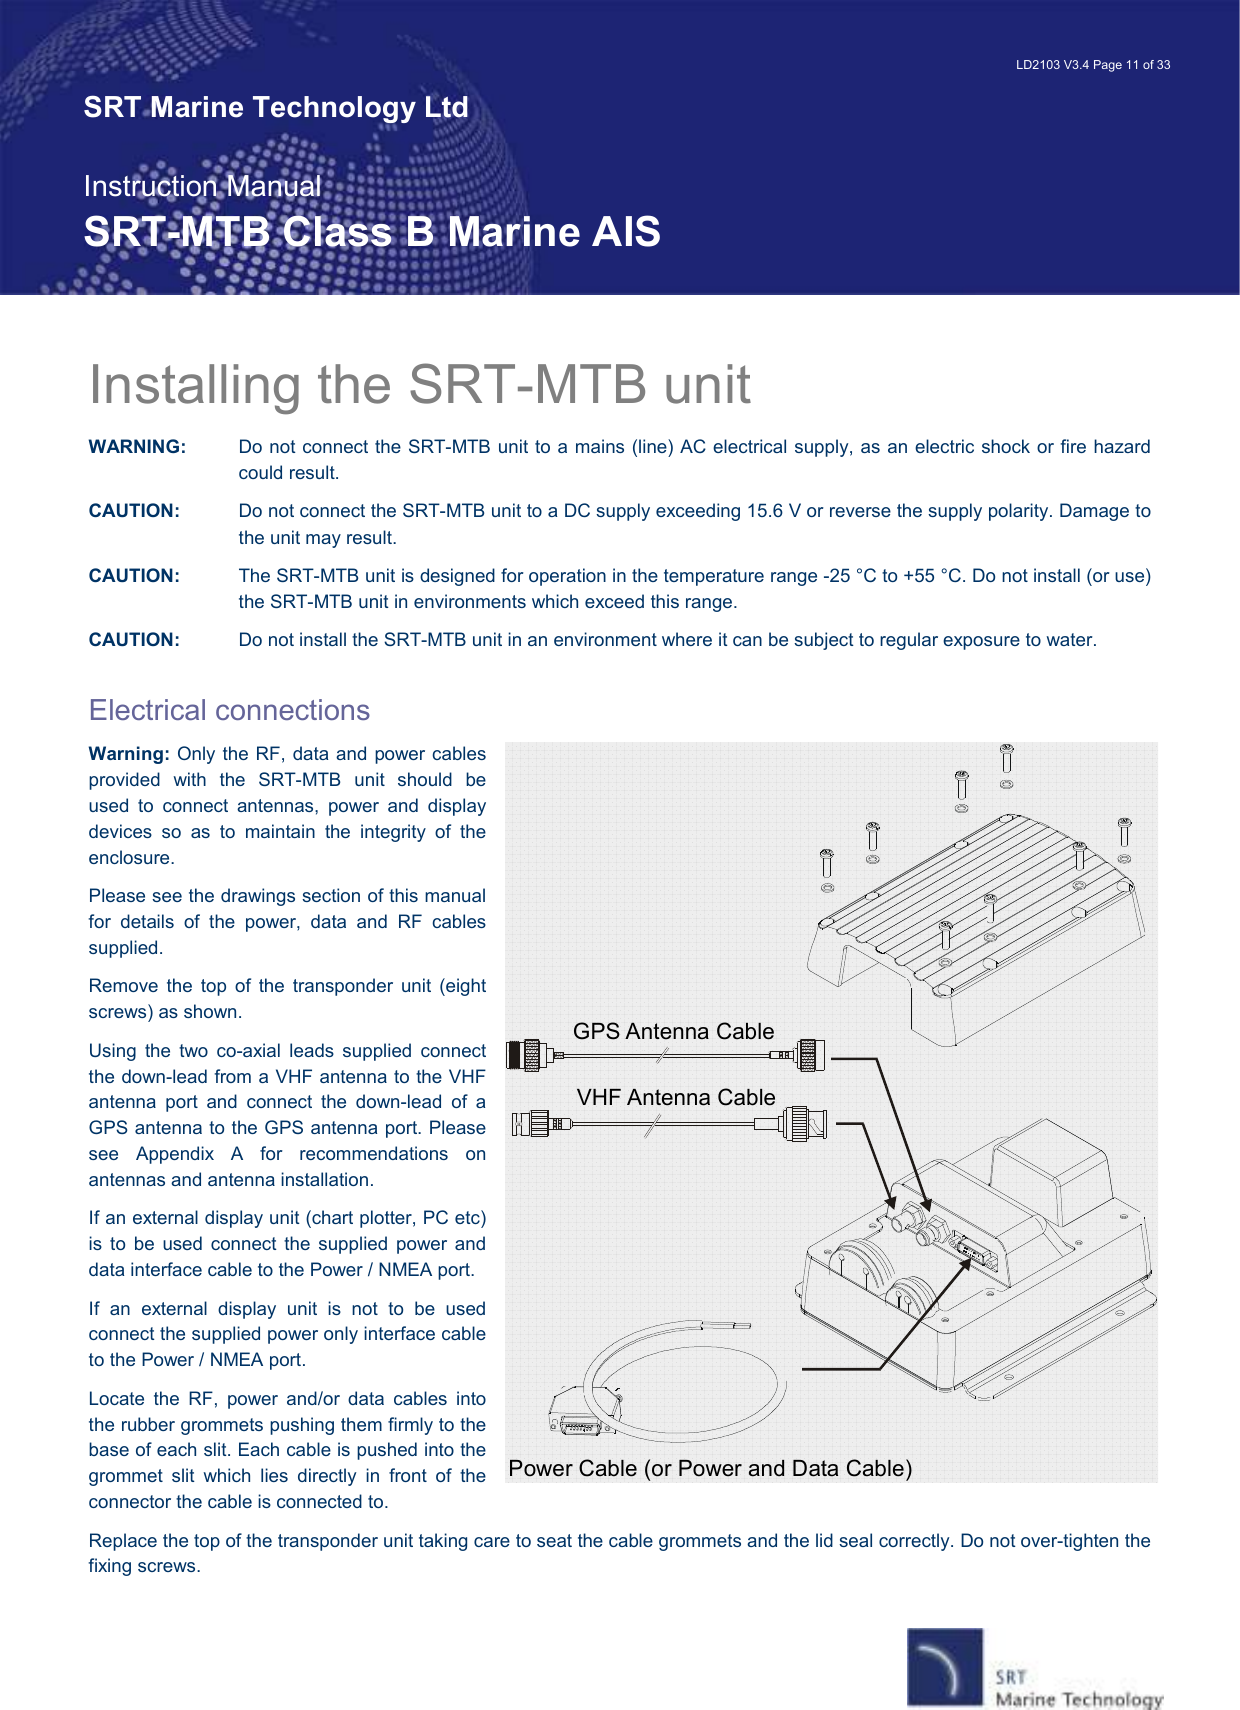   LD2103 V3.4 Page 11 of 33 SRT Marine Technology Ltd  Instruction Manual SRT-MTB Class B Marine AIS Power Cable (or Power and Data Cable)GPS Antenna CableVHF Antenna CableInstalling the SRT-MTB unit WARNING:   Do not connect the SRT-MTB unit to a mains (line) AC electrical supply, as an electric shock or fire hazard could result. CAUTION:  Do not connect the SRT-MTB unit to a DC supply exceeding 15.6 V or reverse the supply polarity. Damage to the unit may result. CAUTION:   The SRT-MTB unit is designed for operation in the temperature range -25 °C to +55 °C. Do not install (or use) the SRT-MTB unit in environments which exceed this range. CAUTION:   Do not install the SRT-MTB unit in an environment where it can be subject to regular exposure to water.  Electrical connections Warning: Only the RF, data and power cables provided  with  the  SRT-MTB  unit  should  be used  to  connect  antennas,  power  and  display devices  so  as  to  maintain  the  integrity  of  the enclosure.  Please see the drawings section of this manual for  details  of  the  power,  data  and  RF  cables supplied. Remove  the  top  of  the  transponder  unit  (eight screws) as shown. Using  the  two  co-axial  leads  supplied  connect the down-lead from a VHF antenna to the VHF antenna  port  and  connect  the  down-lead  of  a GPS antenna to the GPS antenna port. Please see  Appendix  A  for  recommendations  on antennas and antenna installation. If an external display unit (chart plotter, PC etc) is  to  be  used  connect  the  supplied  power  and data interface cable to the Power / NMEA port. If  an  external  display  unit  is  not  to  be  used connect the supplied power only interface cable to the Power / NMEA port. Locate  the  RF,  power  and/or  data  cables  into the rubber grommets pushing them firmly to the base of each slit. Each cable is pushed into the grommet  slit  which  lies  directly  in  front  of  the connector the cable is connected to. Replace the top of the transponder unit taking care to seat the cable grommets and the lid seal correctly. Do not over-tighten the fixing screws. 